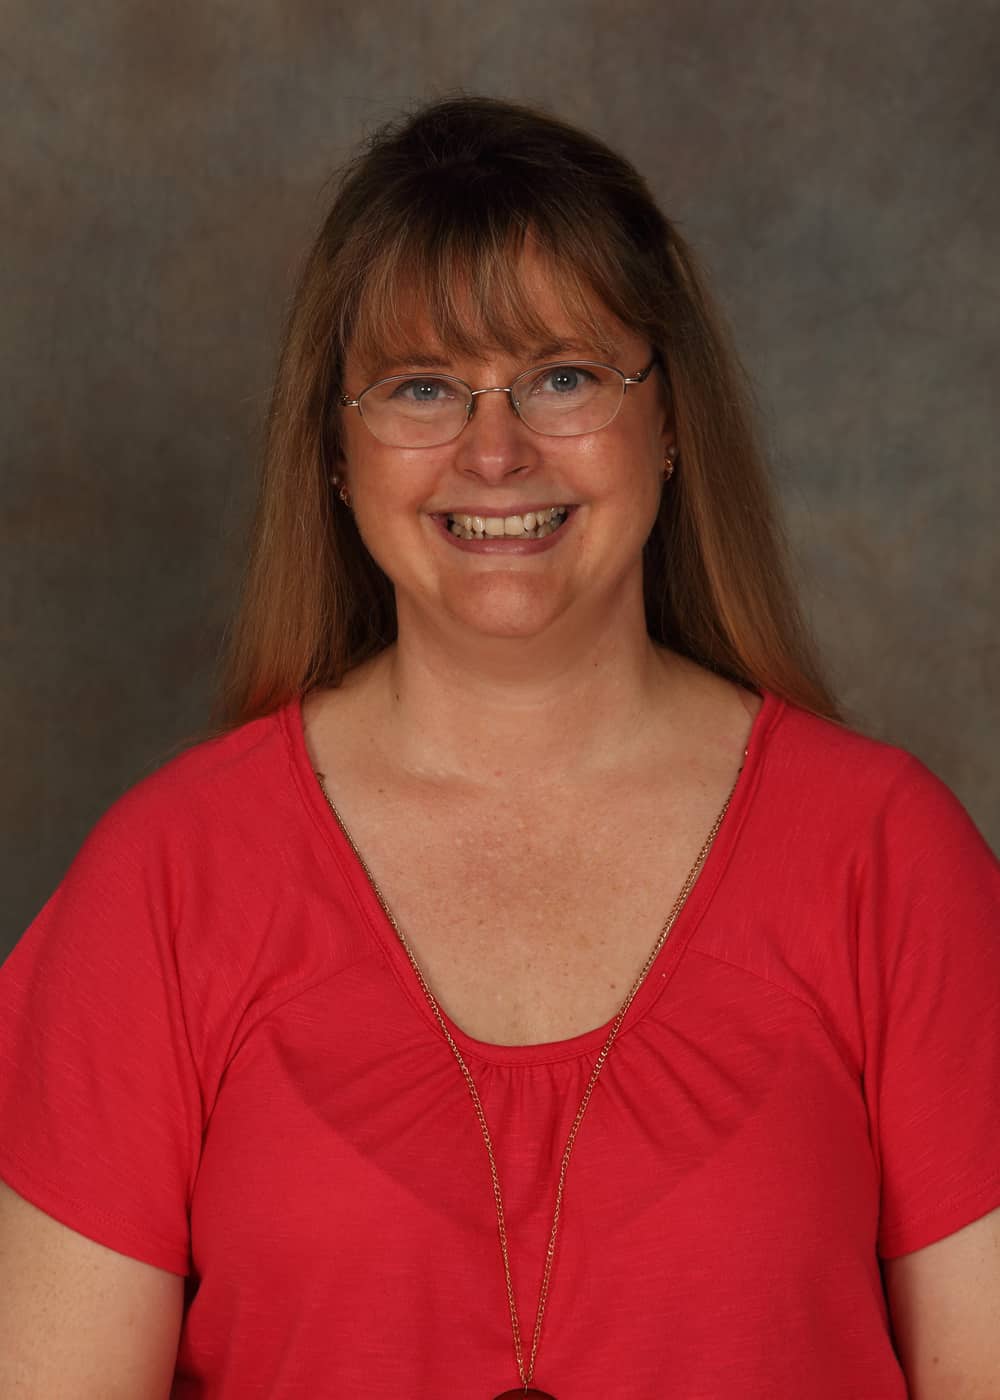 Photo of Lead Teacher Heidi Flynn. She is a Caucasian woman with long blonde hair, blue eyes and gold-rimmed glasses. She is smiling and wears a gold necklace and coral colored dress.